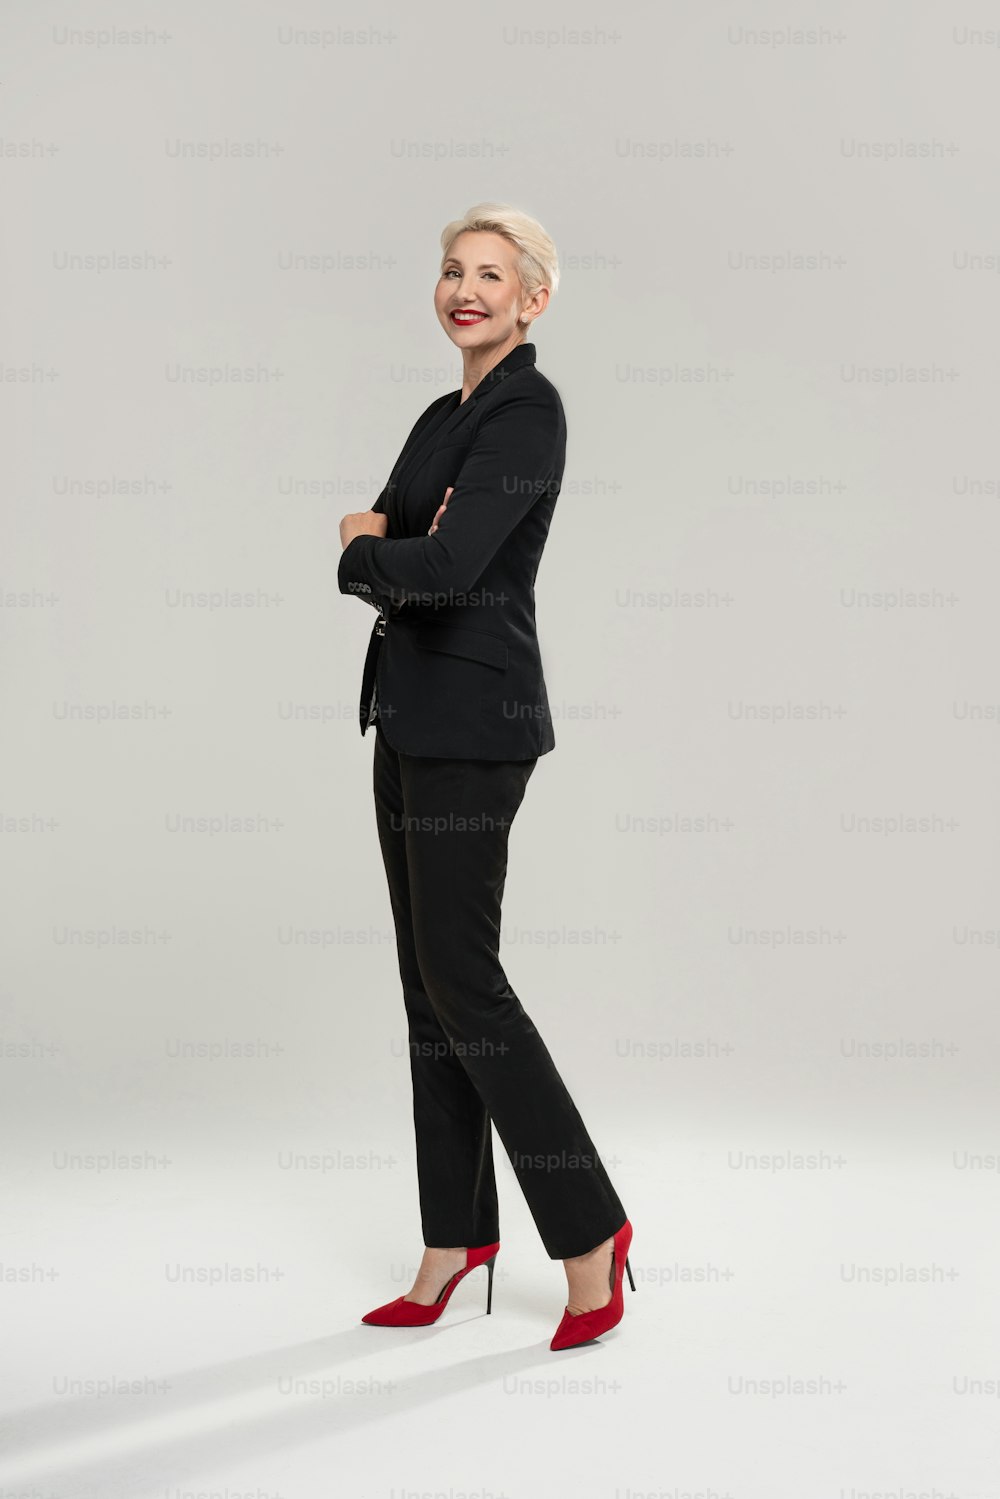 Successful businesswoman with short fashionable hairstyle and glamour makeup, looking at camera, standing. Full length photo. Copy space.